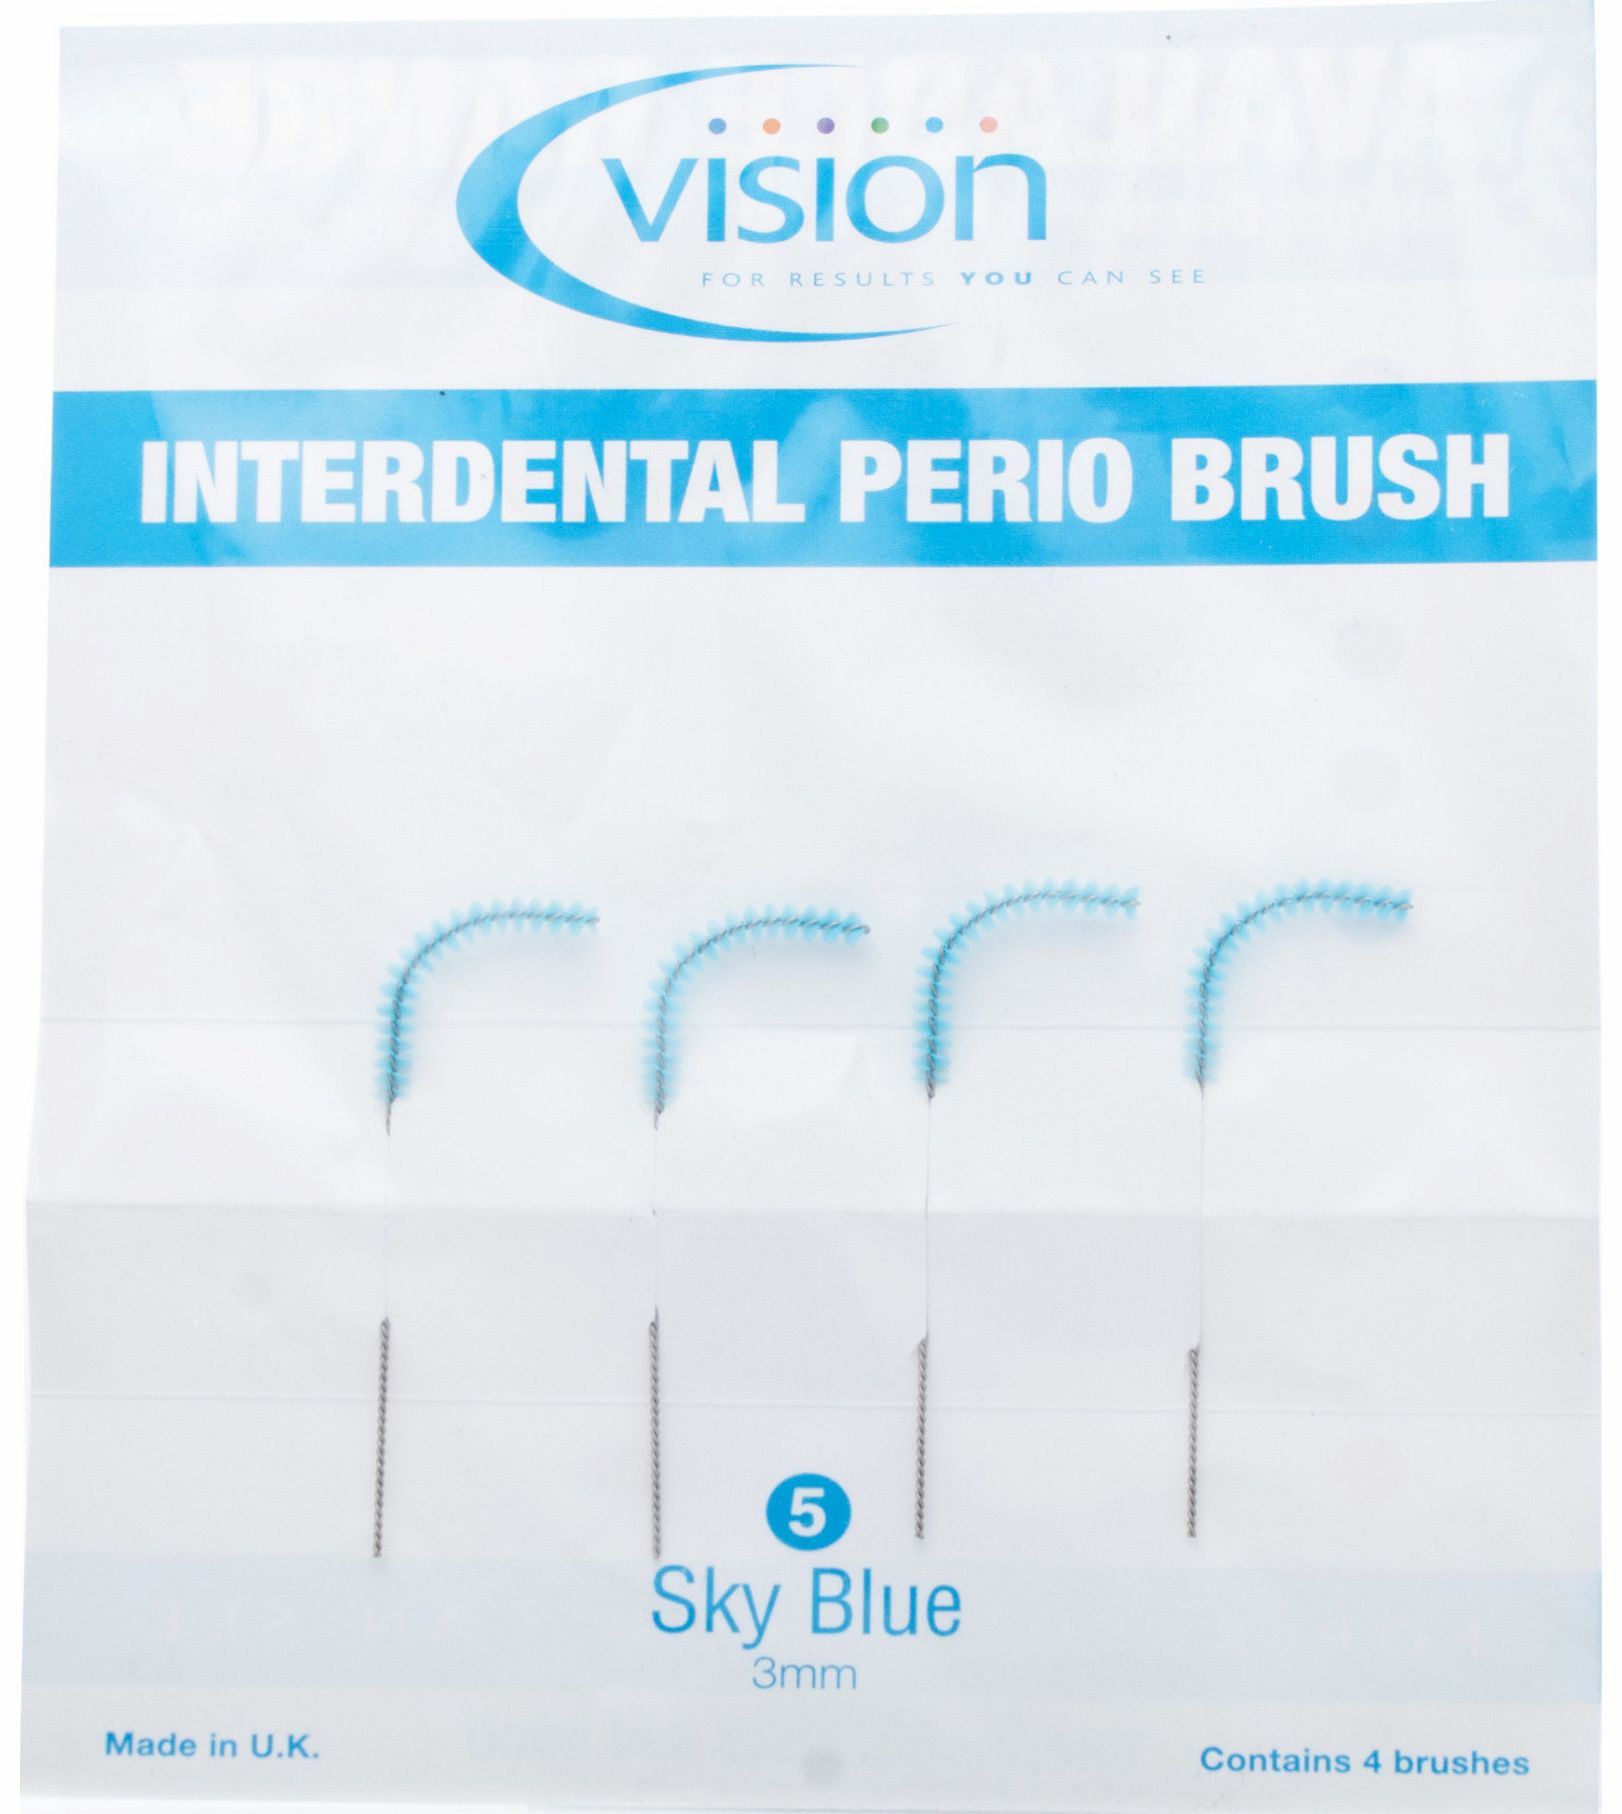 Vision Interdental Perio Brushes - 3mm Sky Blue